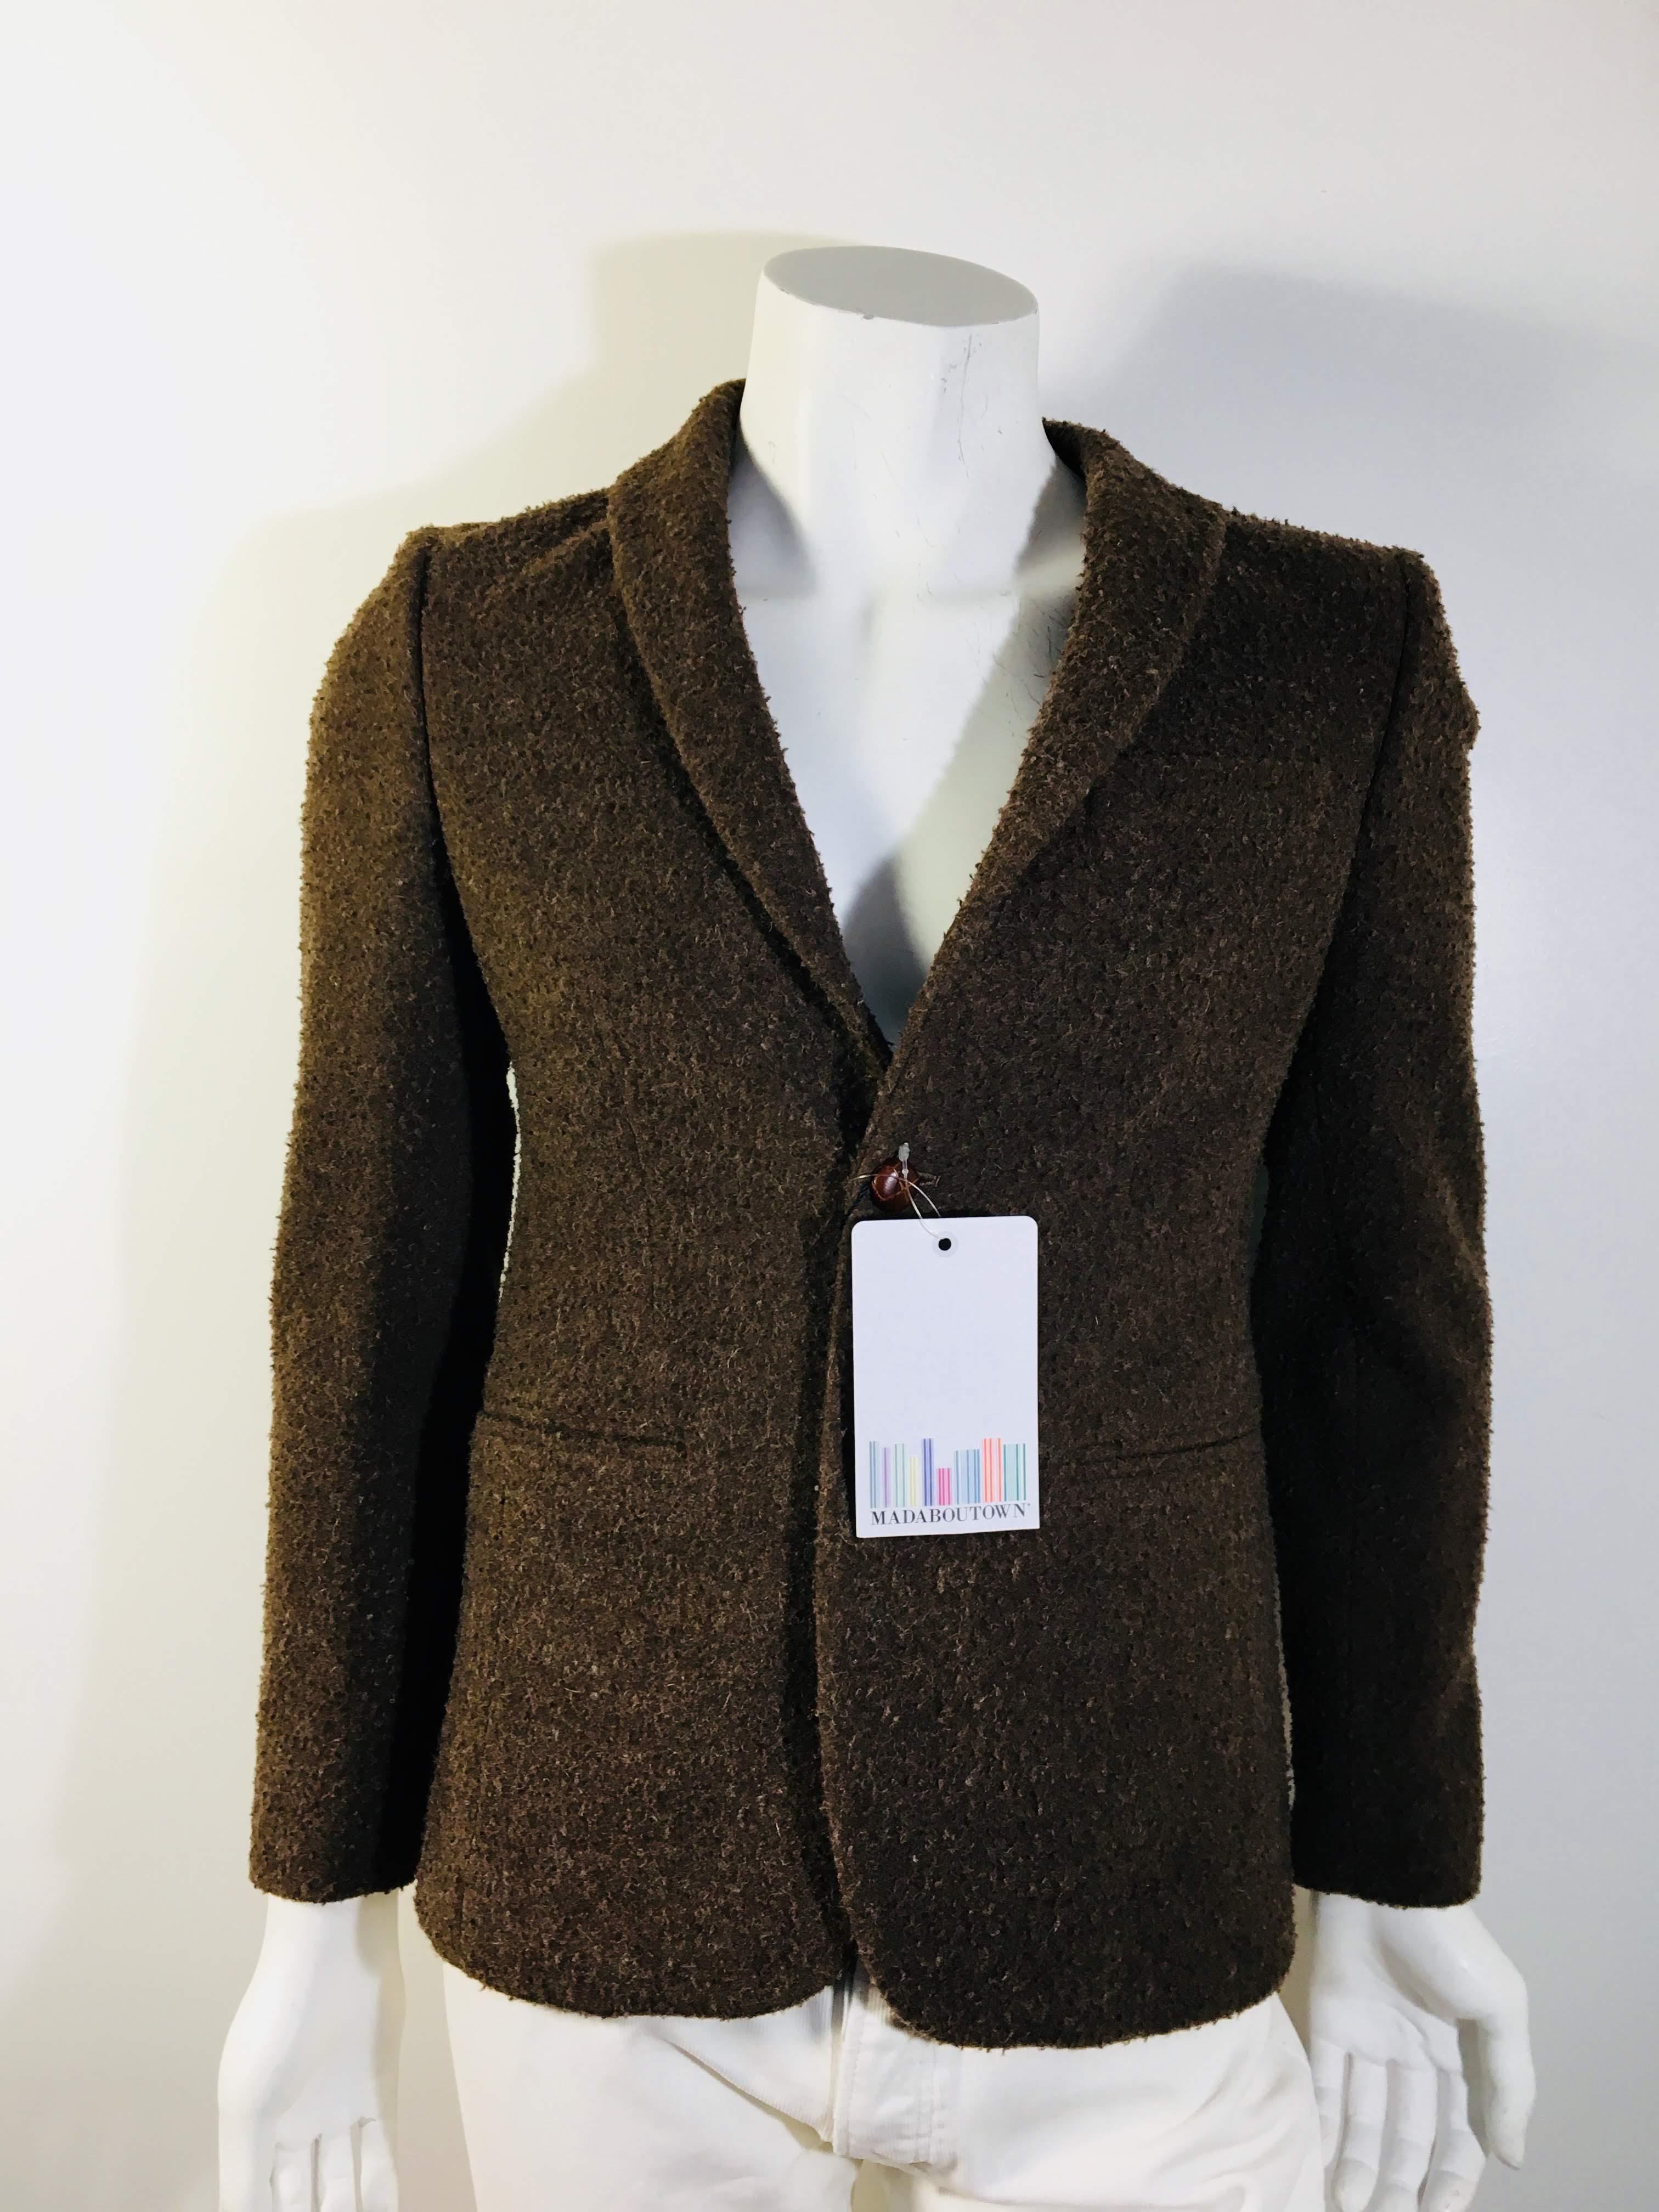 Tessilnova Mens Jacket
100% Brown Wool 
2 Leather Buttons
2 Waist Pockets/ 1 Chest Pocket
NEW WITH TAGS
Size 46/ Small